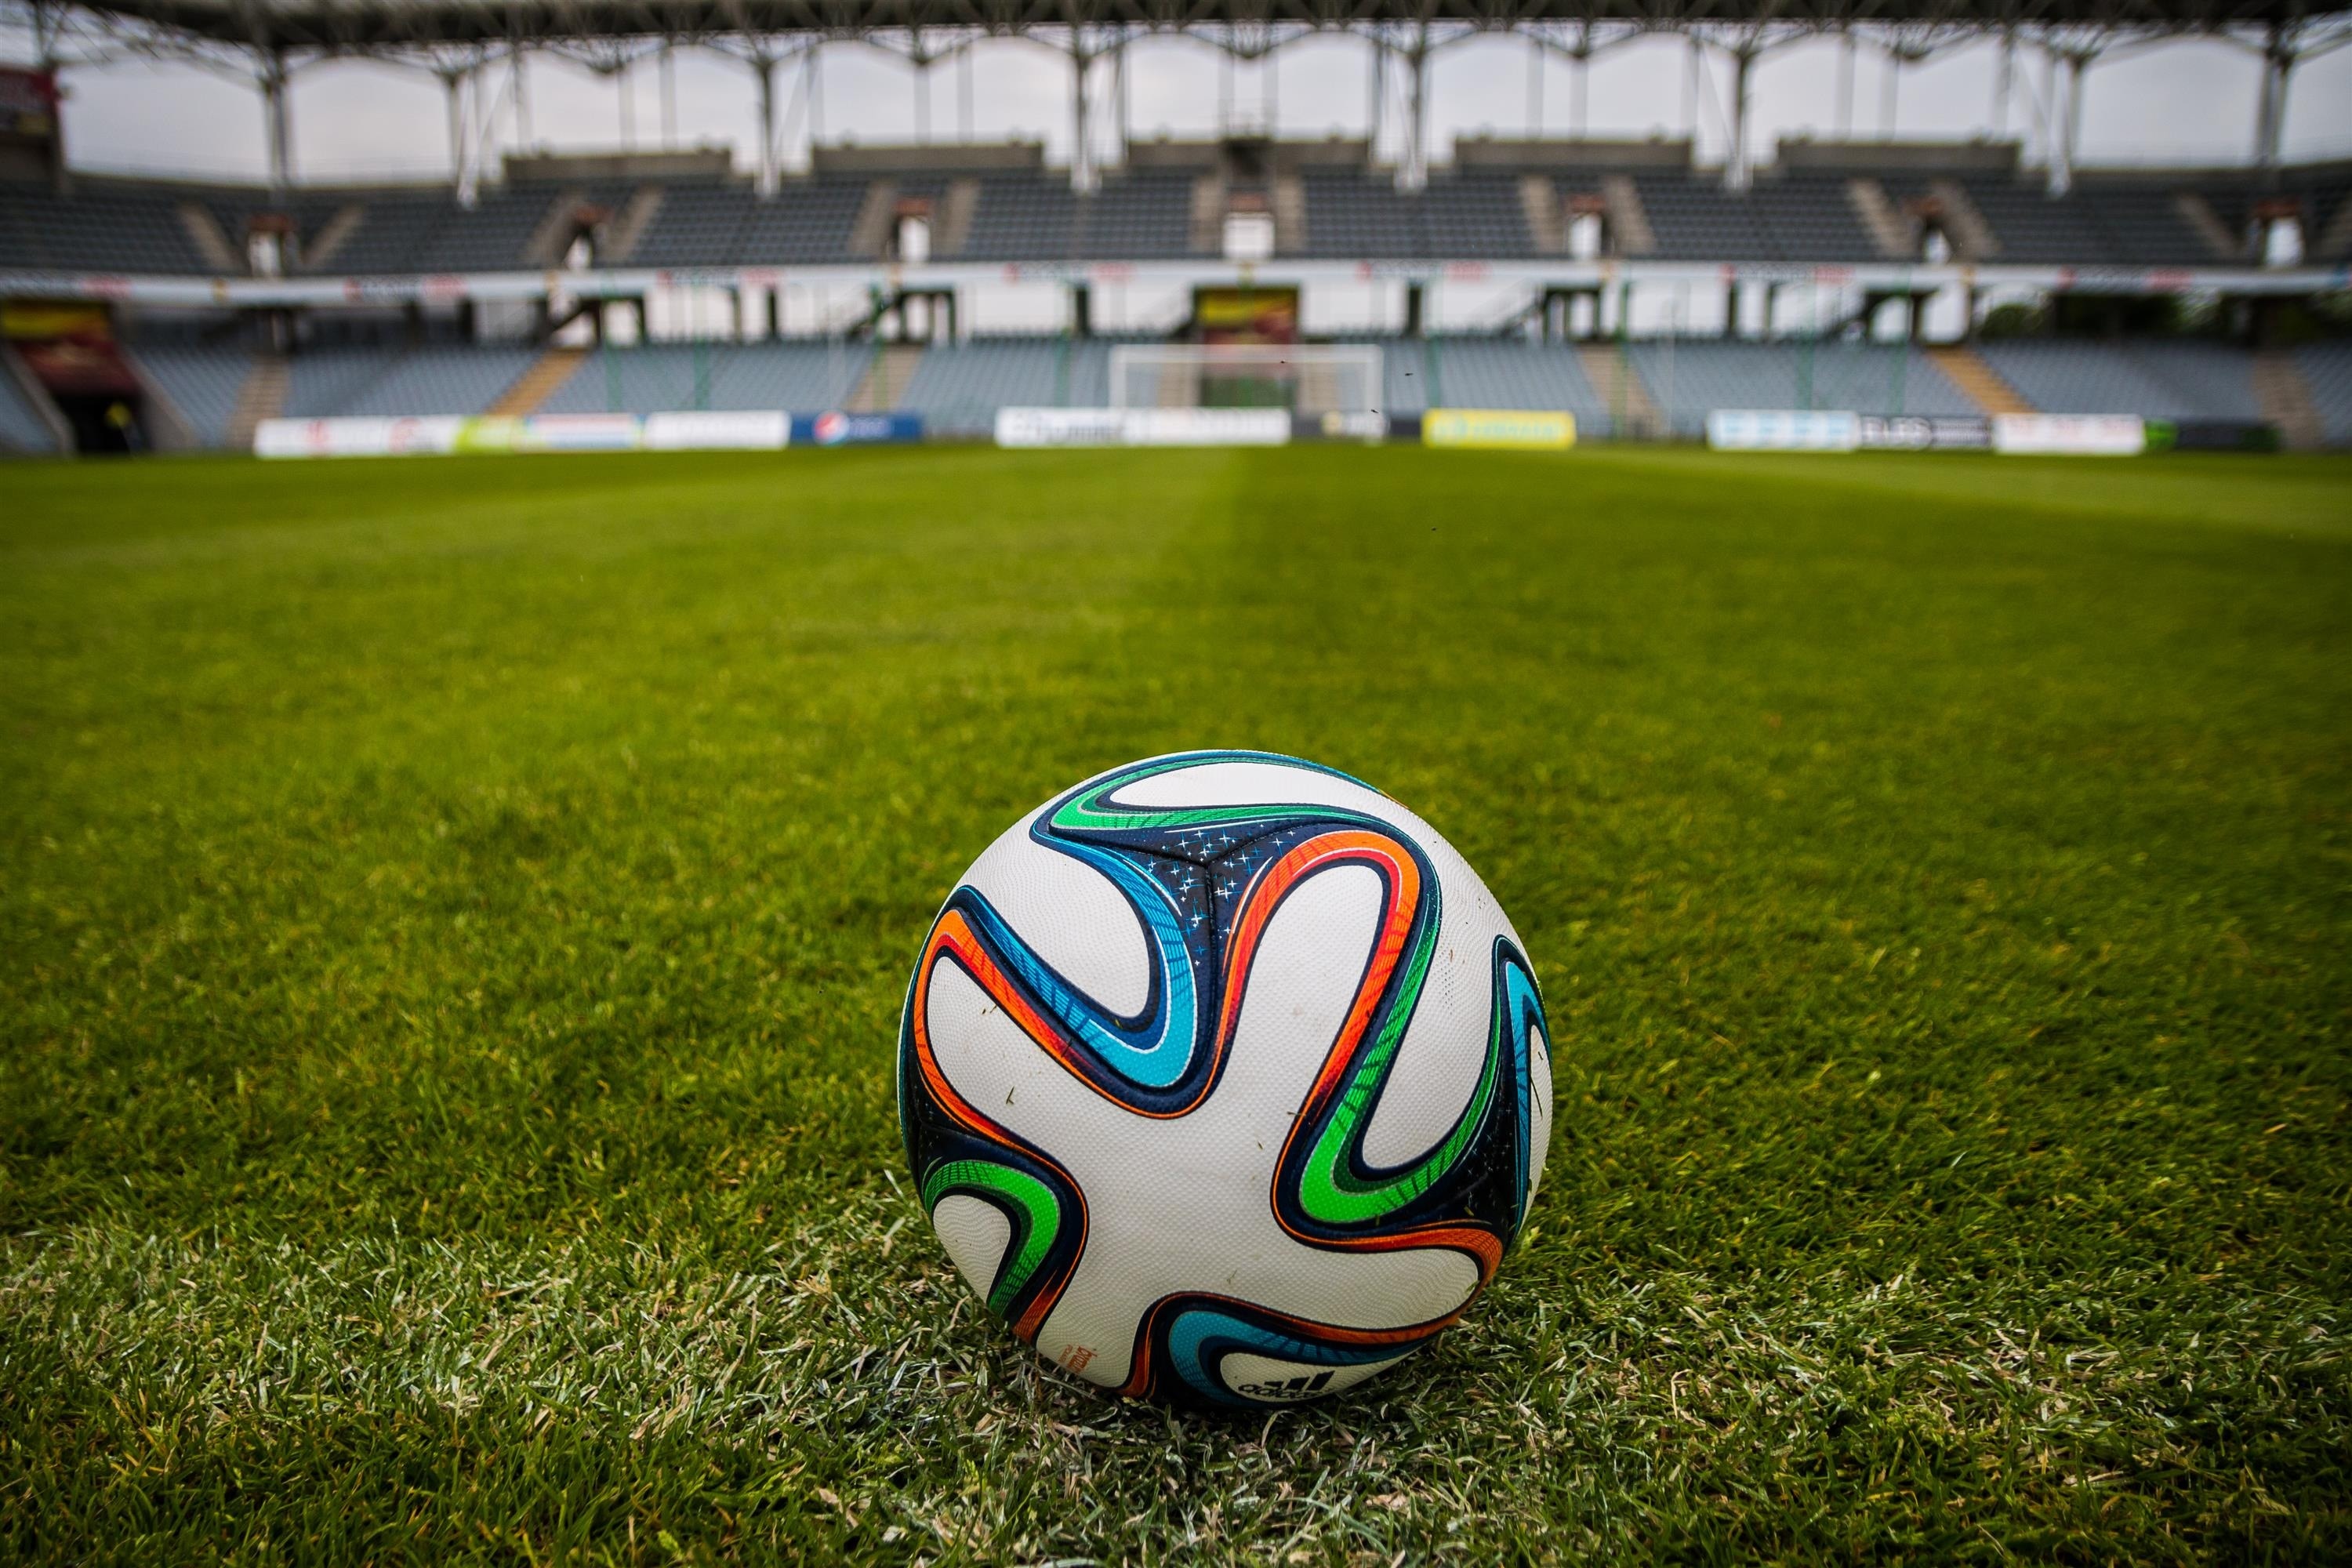 The Pitch, Stadion, The Ball, Football, grass, sport